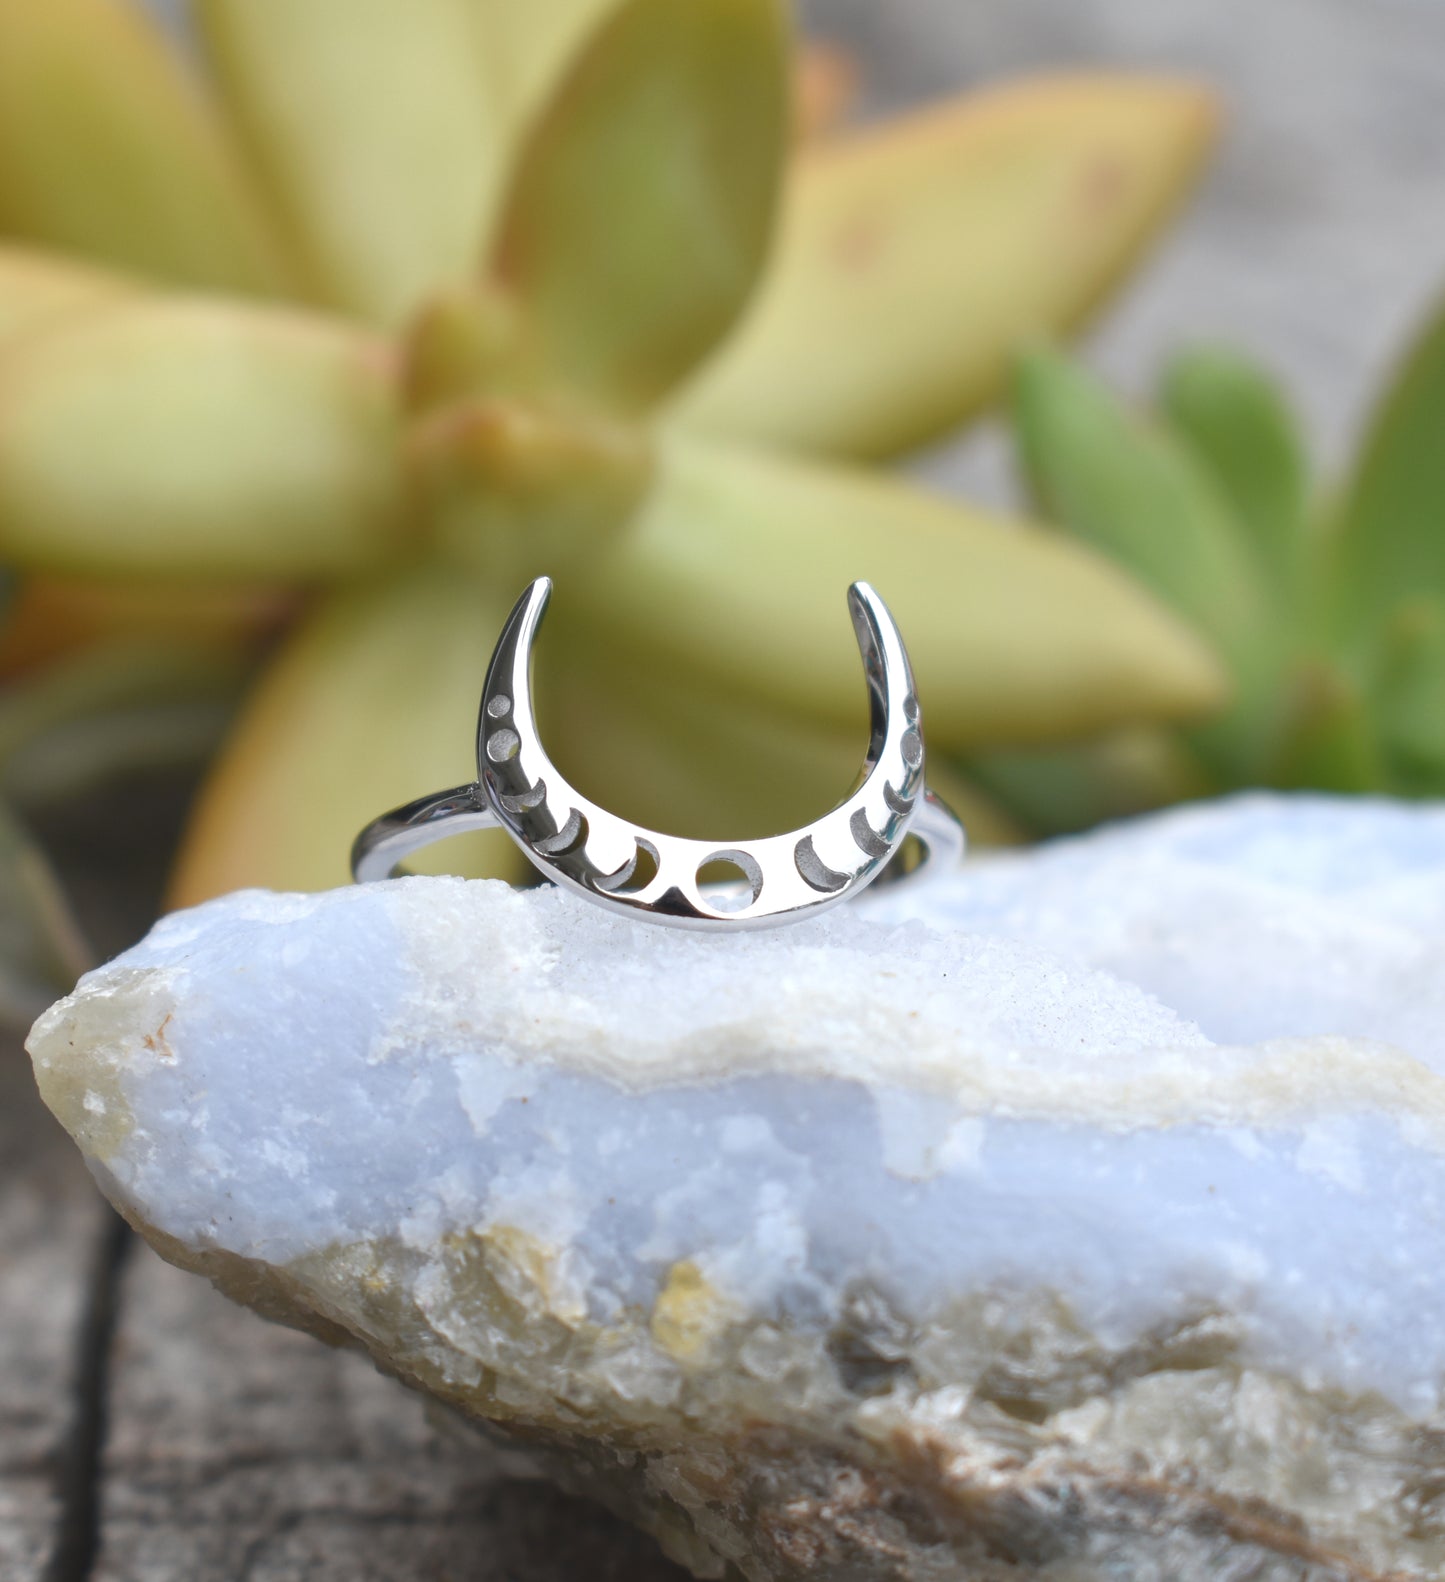 Moon Phase Ring-Crescent Moon Ring, Silver Moon Ring, Luna Ring-Sterling Silver Ring